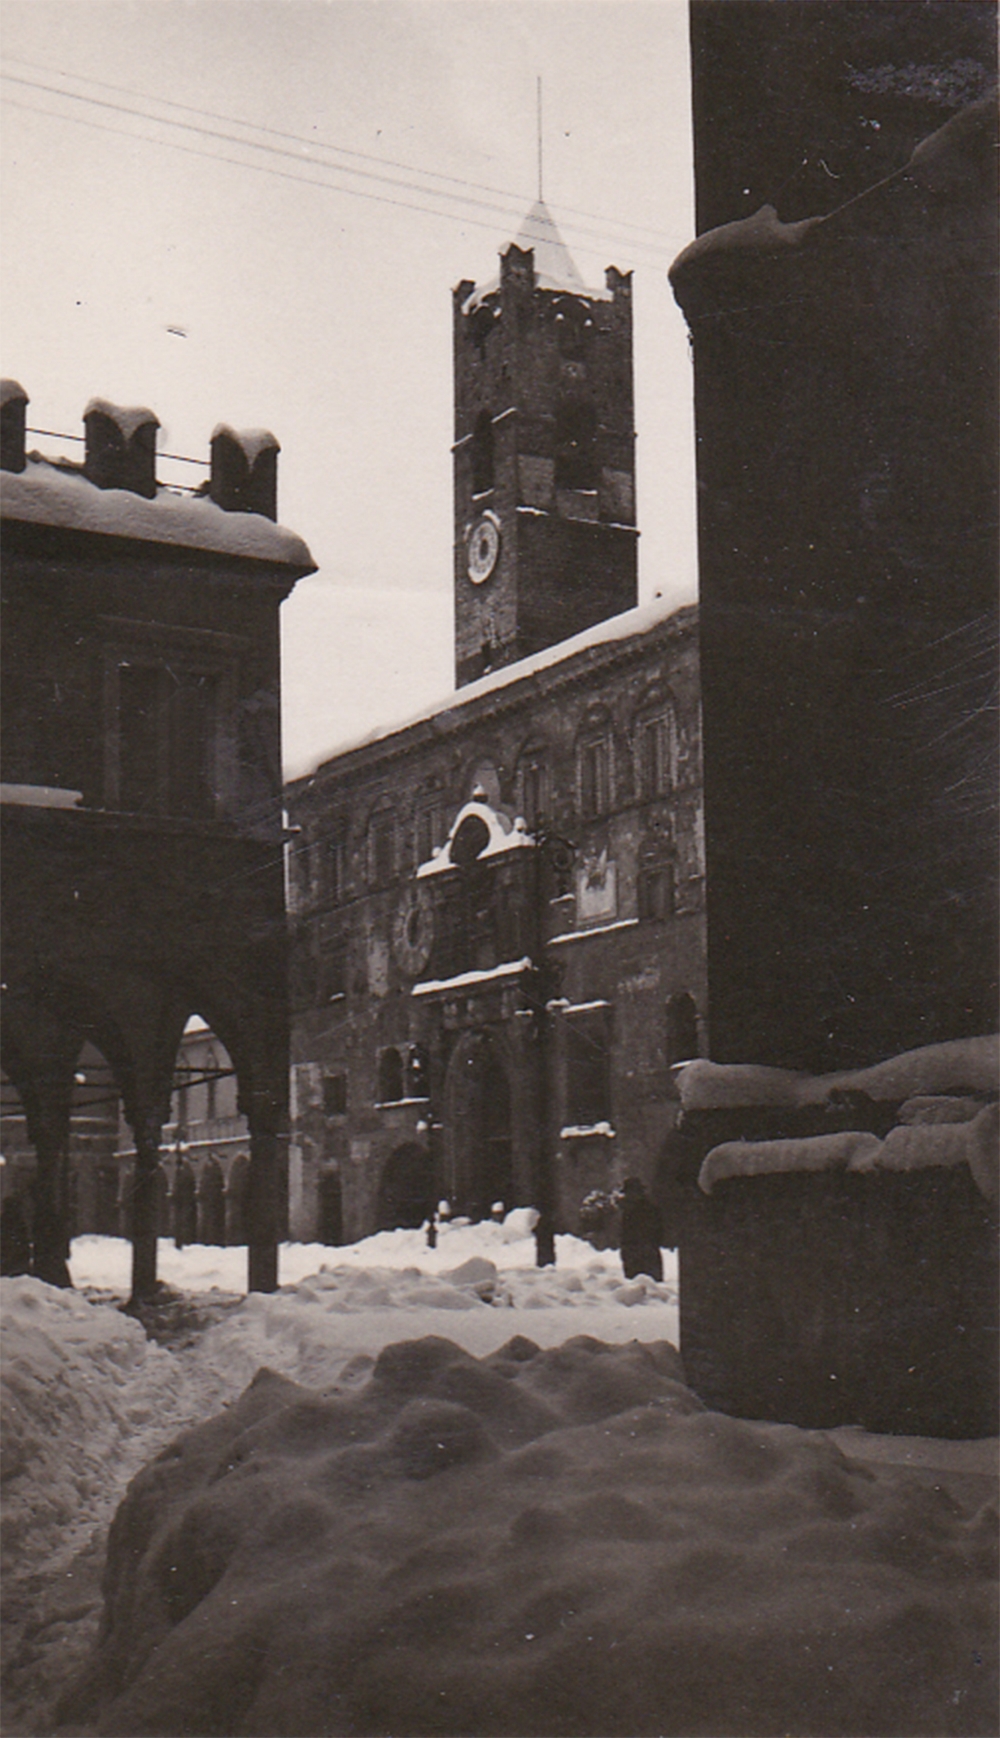 The “Great Snowfall” of 1929 in Ascoli – 2